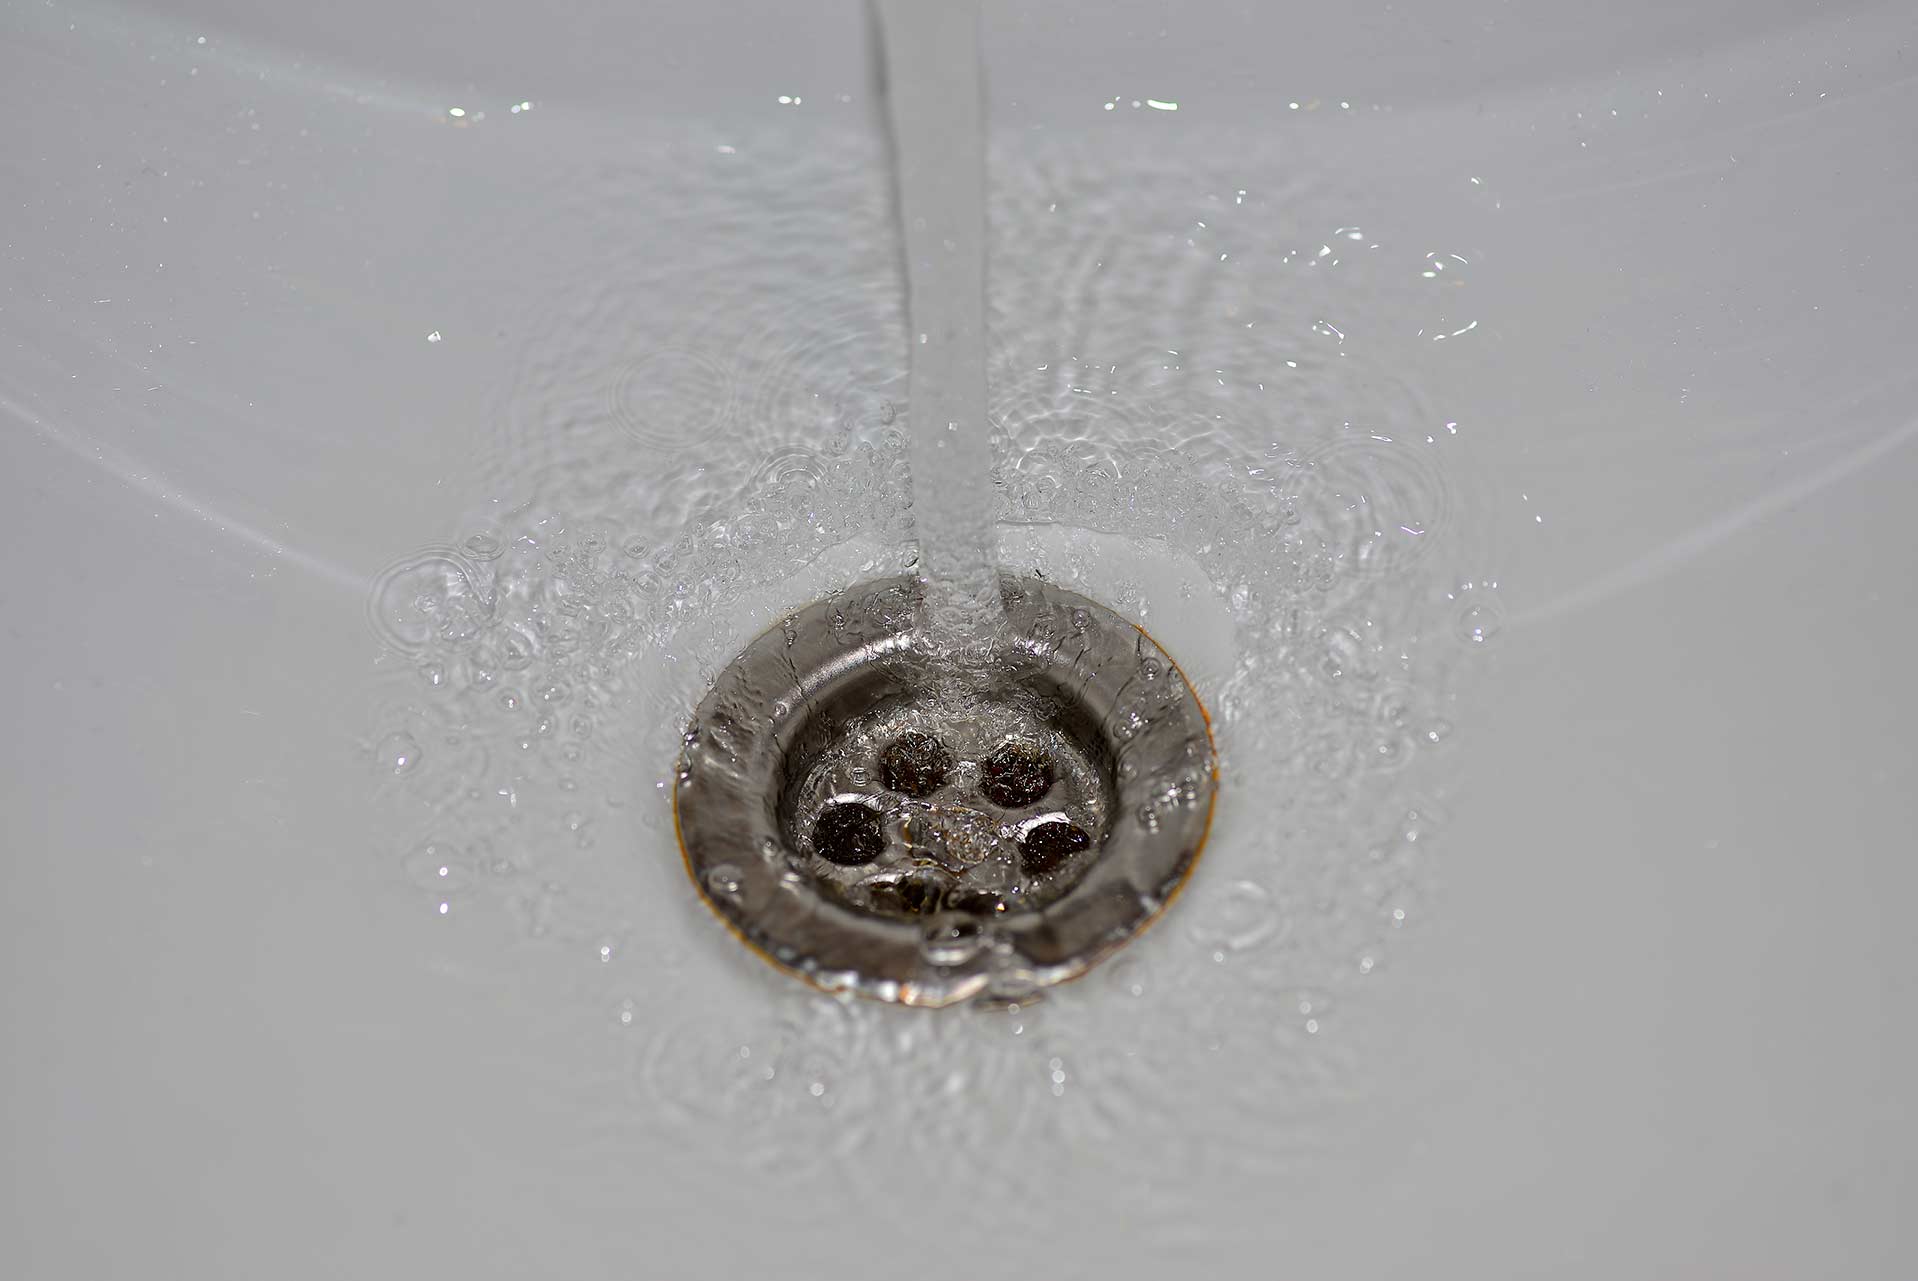 A2B Drains provides services to unblock blocked sinks and drains for properties in Sutton Coldfield.